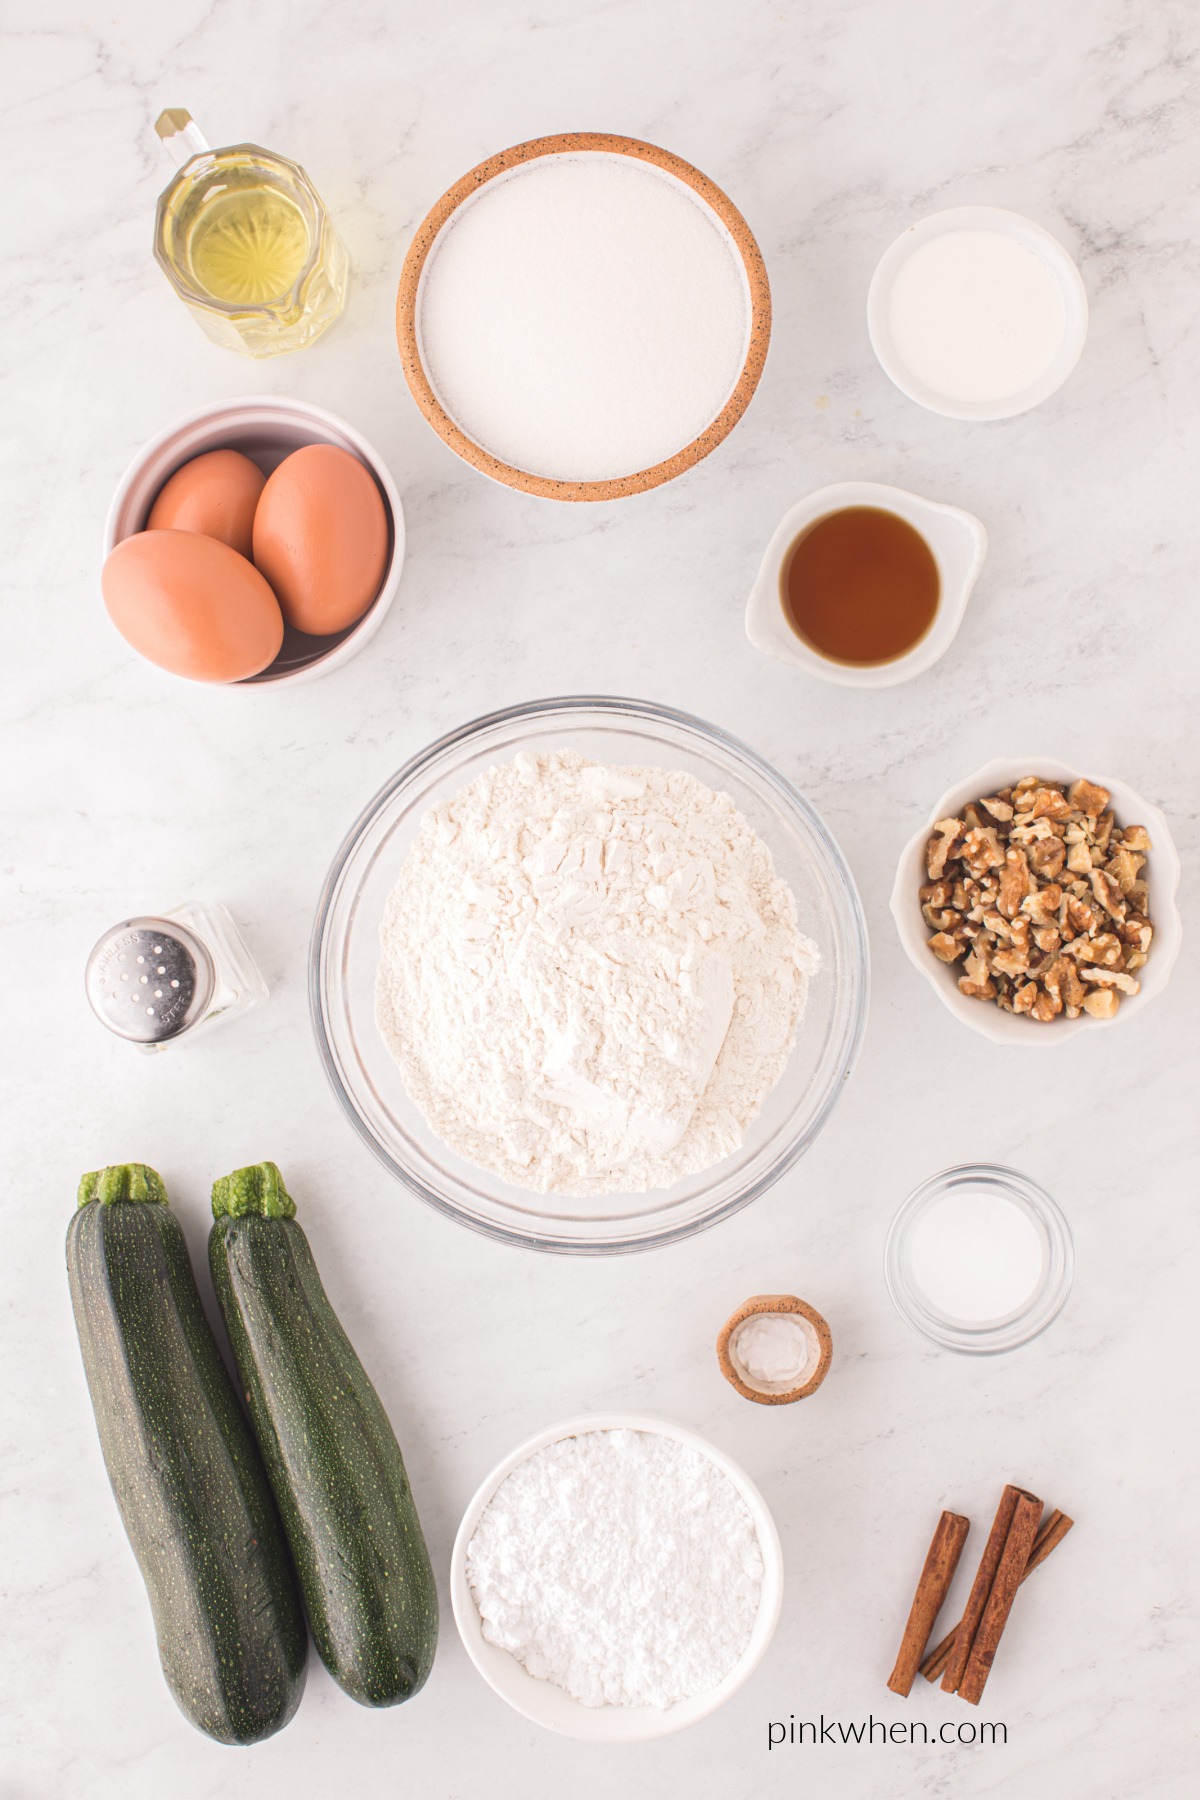 Ingredients in bowls on a table that are used to make zucchini bundt cake with cinnamon icing.